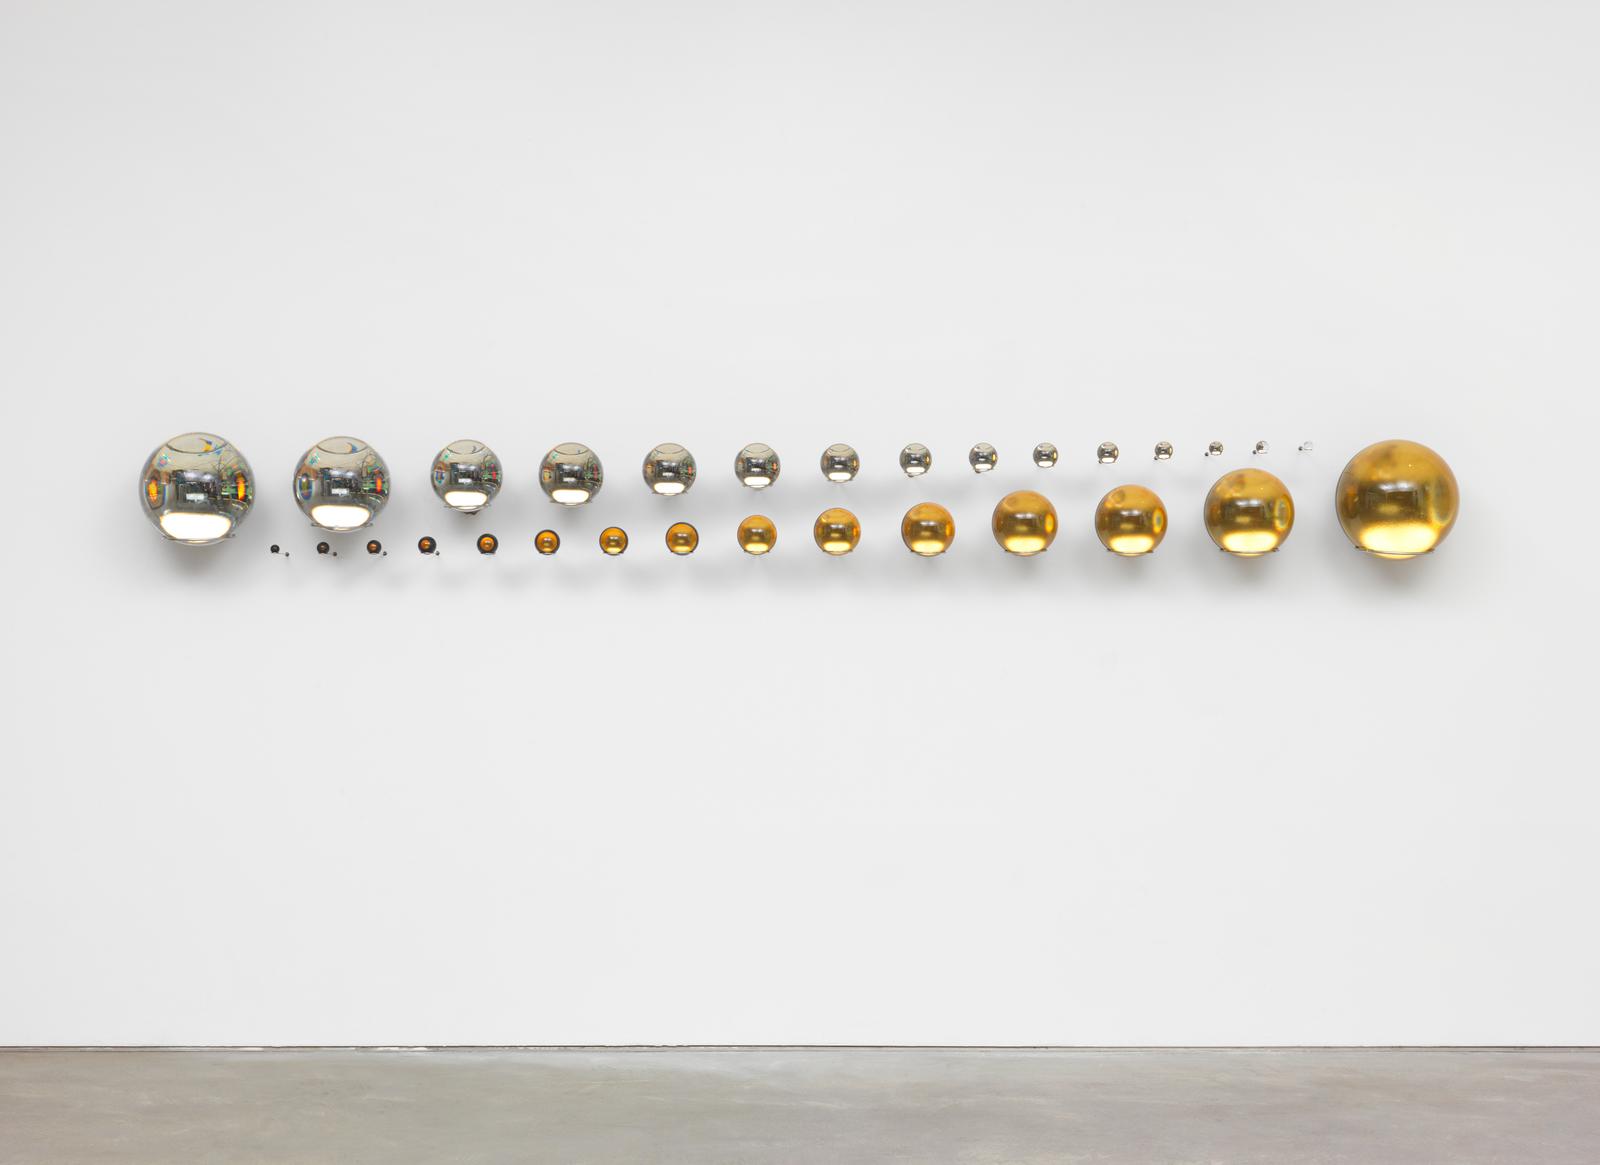 Olafur Eliasson, Leaving and Returning, 2015, Partially silvered crystal spheres, partially gilded crystal spheres, acrylic paint (black), stainless steel,33 x 352 x 33 cm,